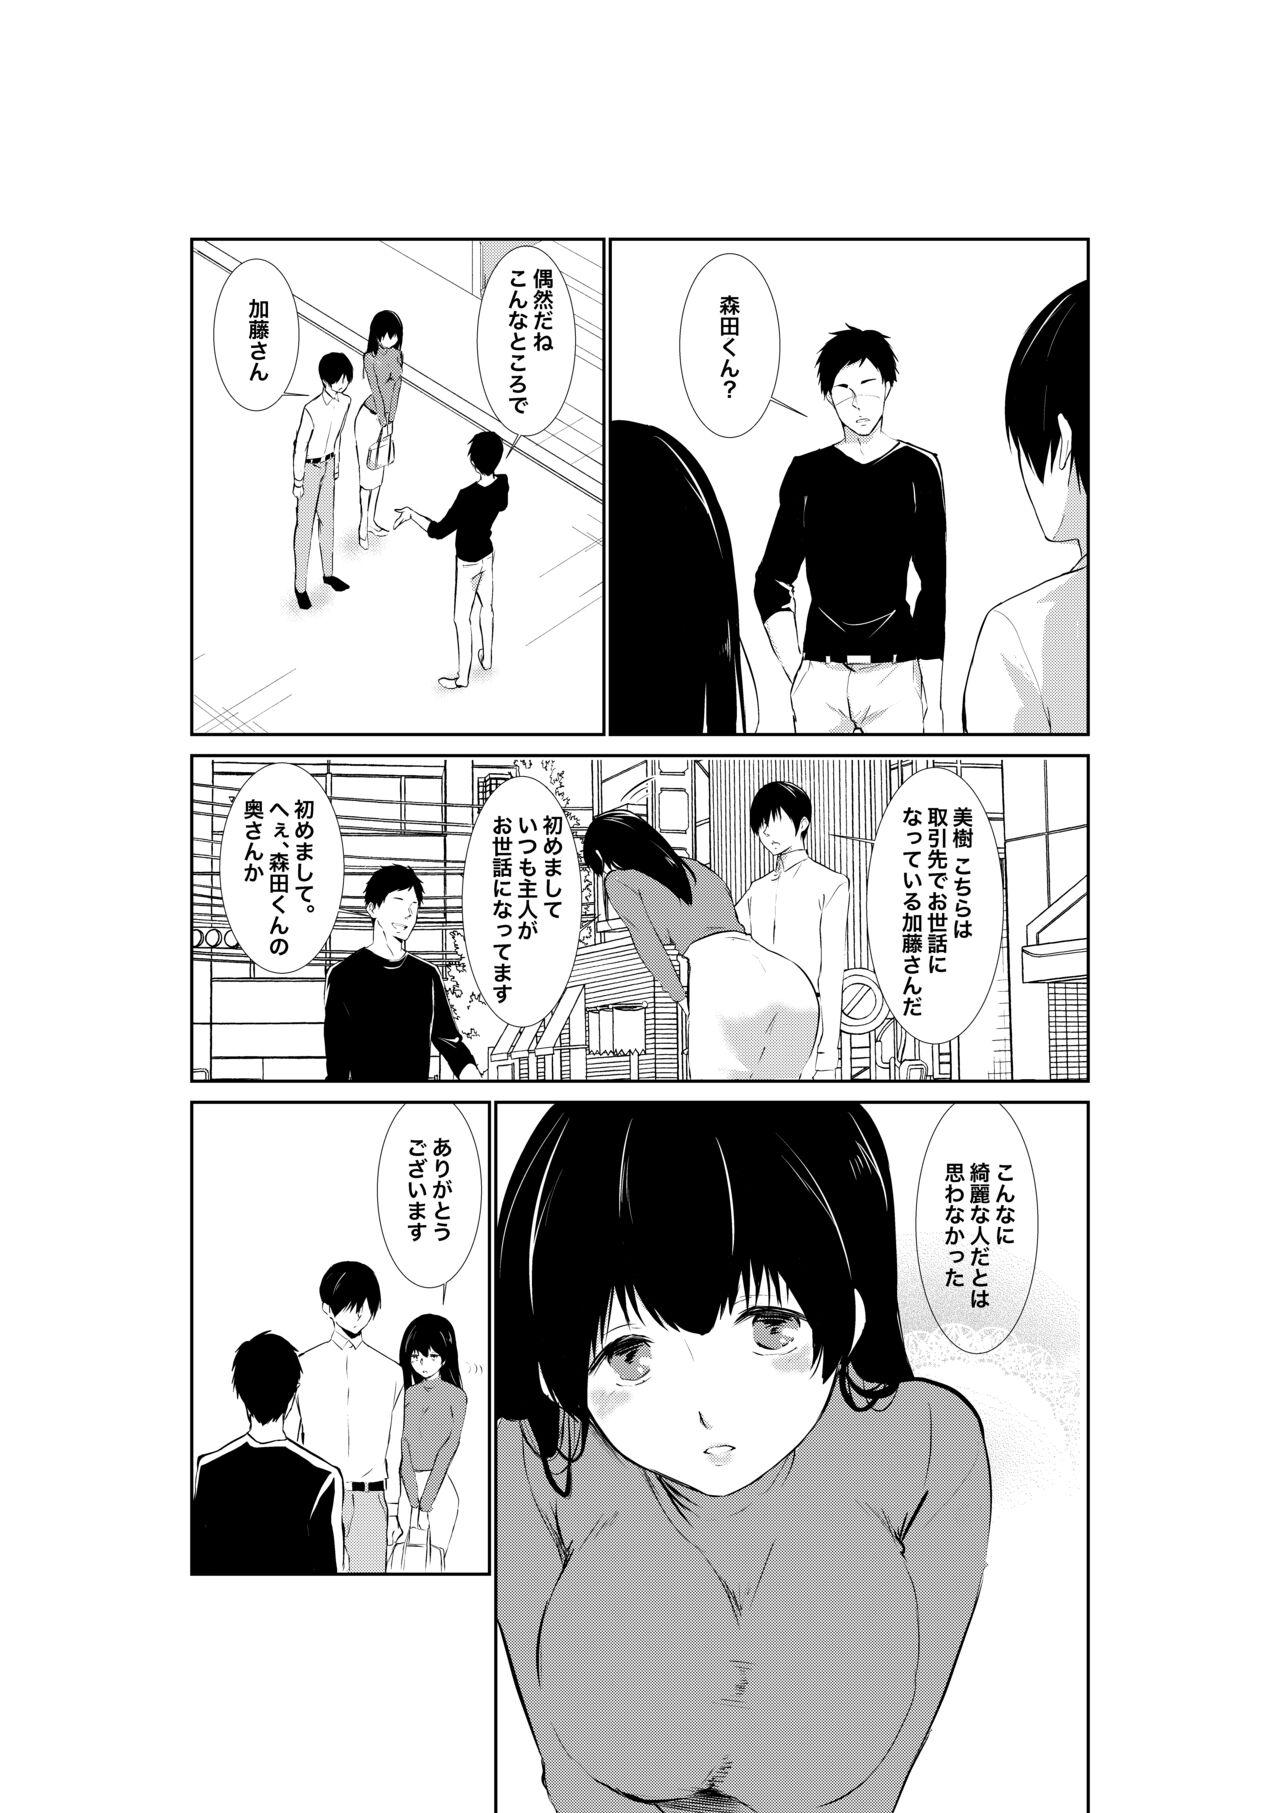 Married 妻が他人に堕ちるまで - Original Taboo - Page 6